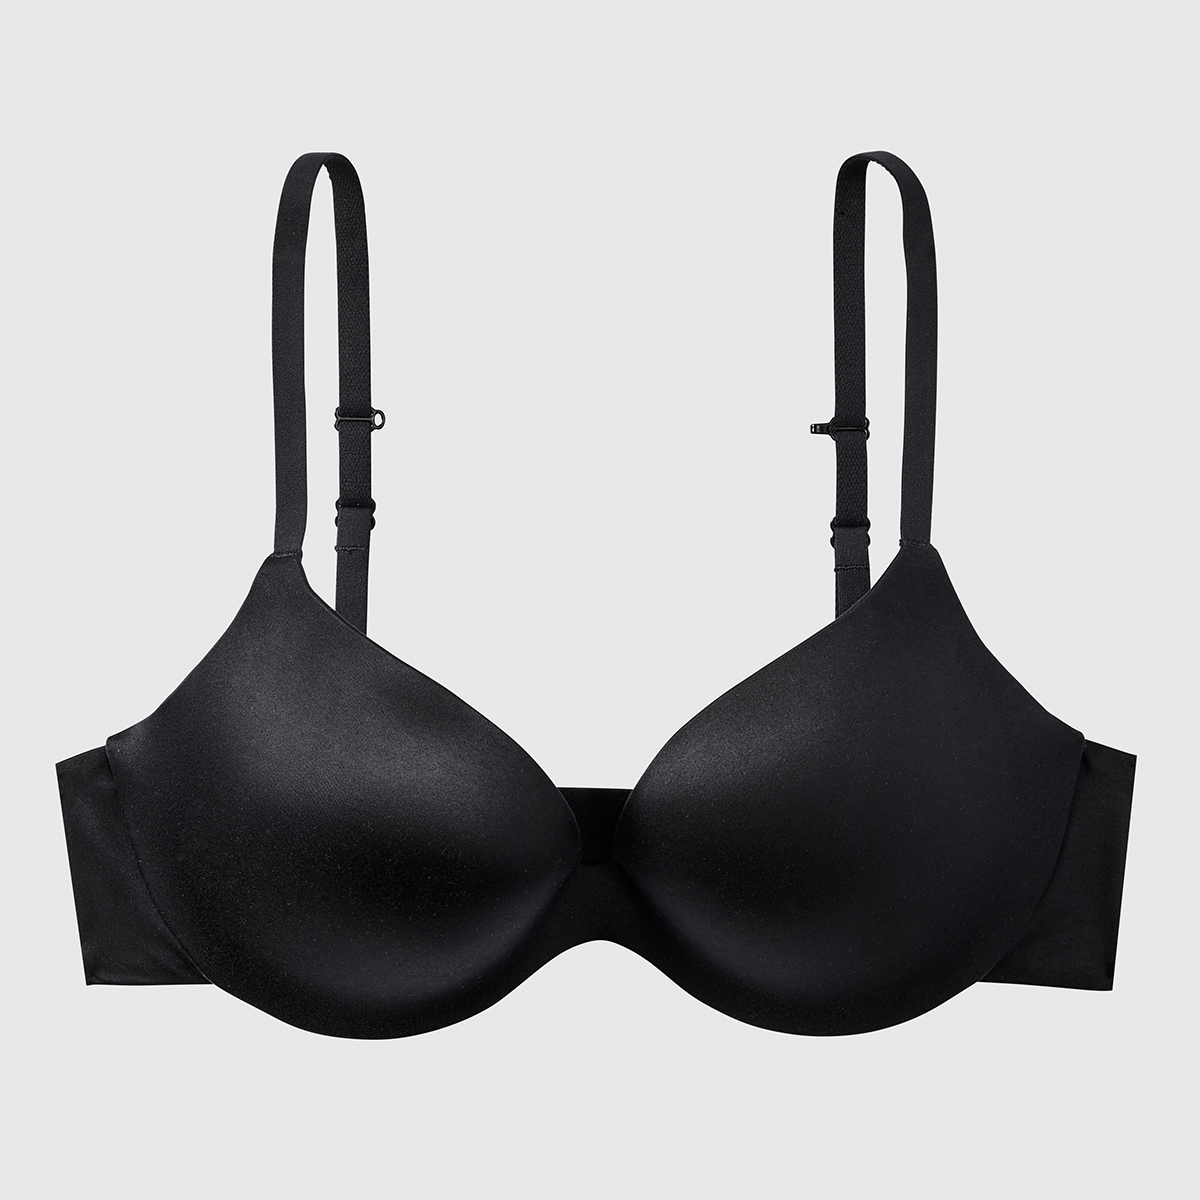 LowProfile Push Up Bra for Women Plus Size Gathered Adjustable Pair of Thin  Breast Cup Underwear Bras Black 52 